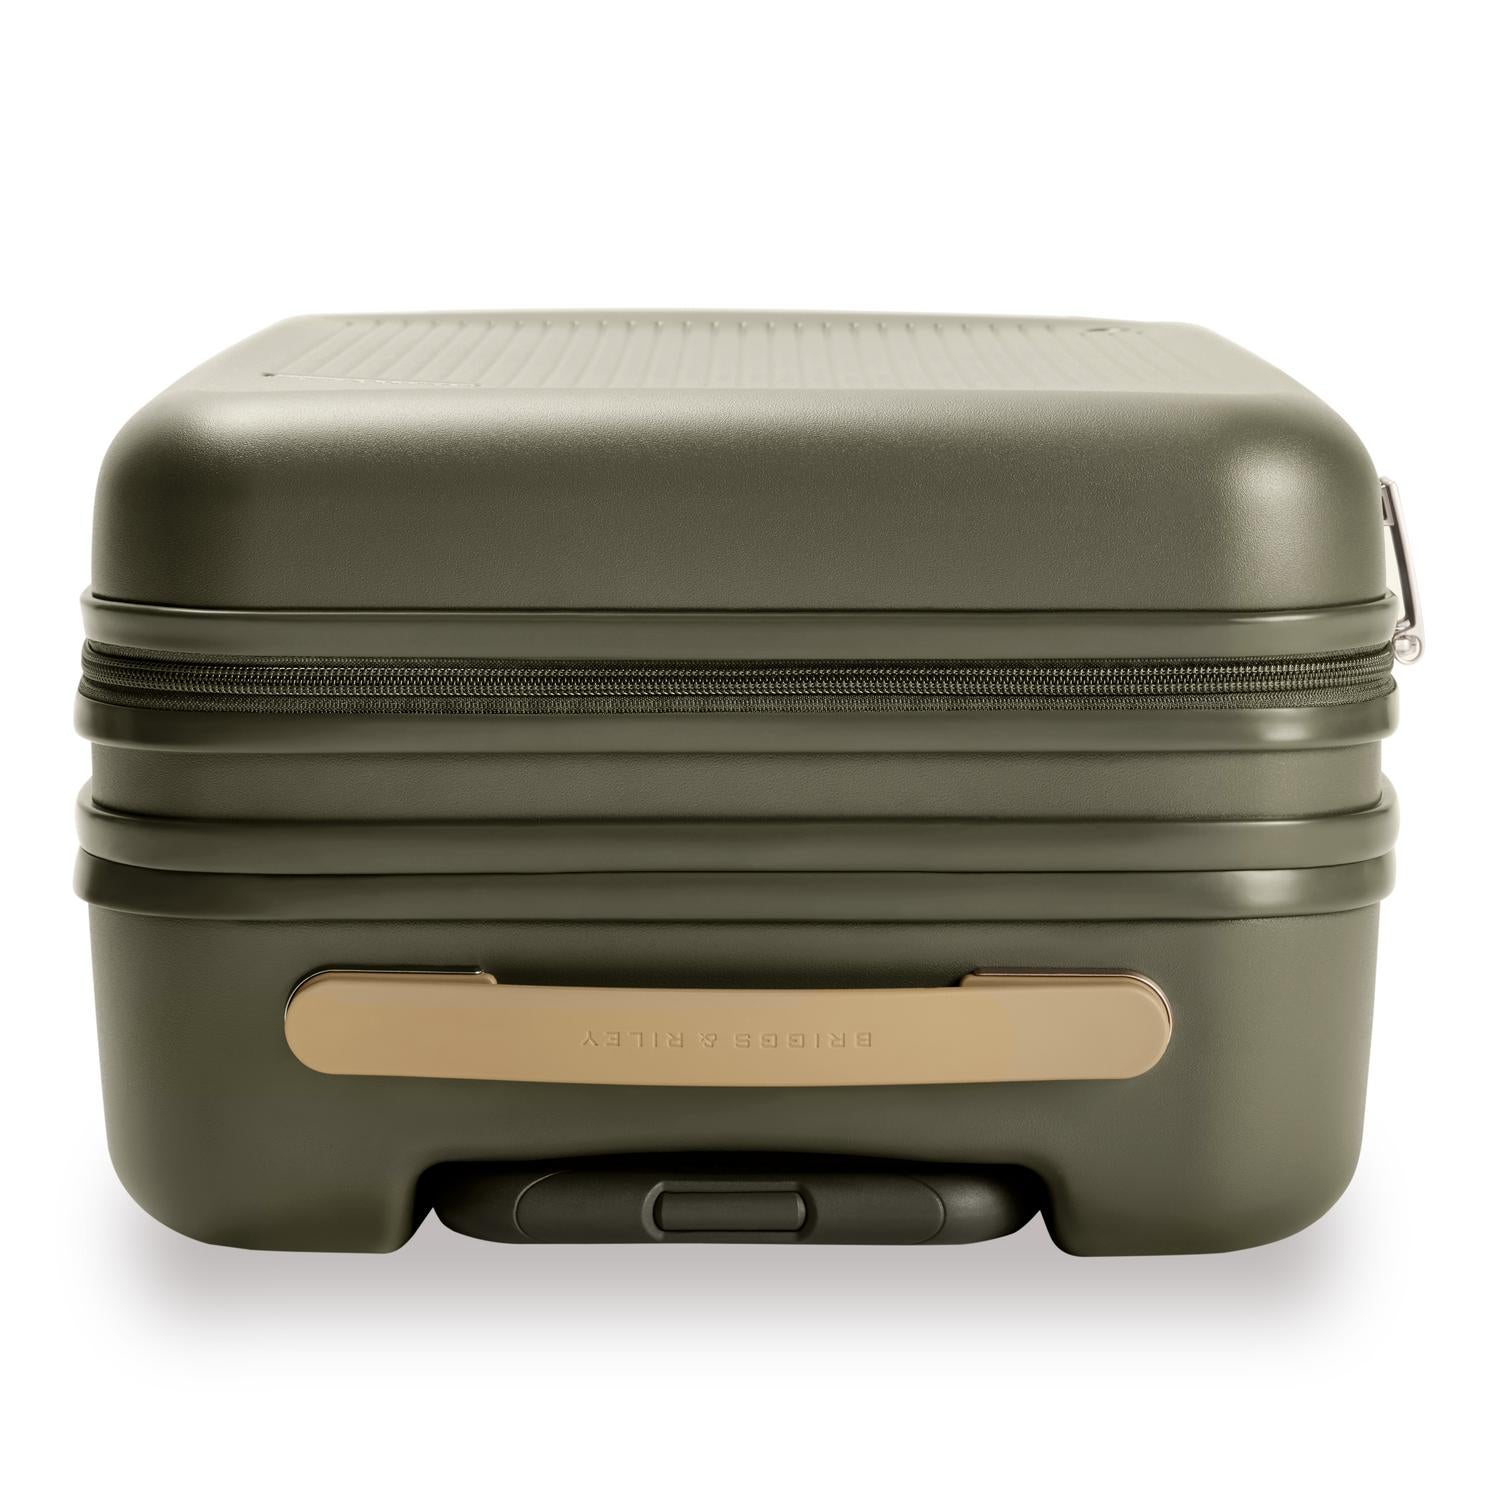 Essential Carry-On Expandable Spinner in Olive, Top View #color_olive